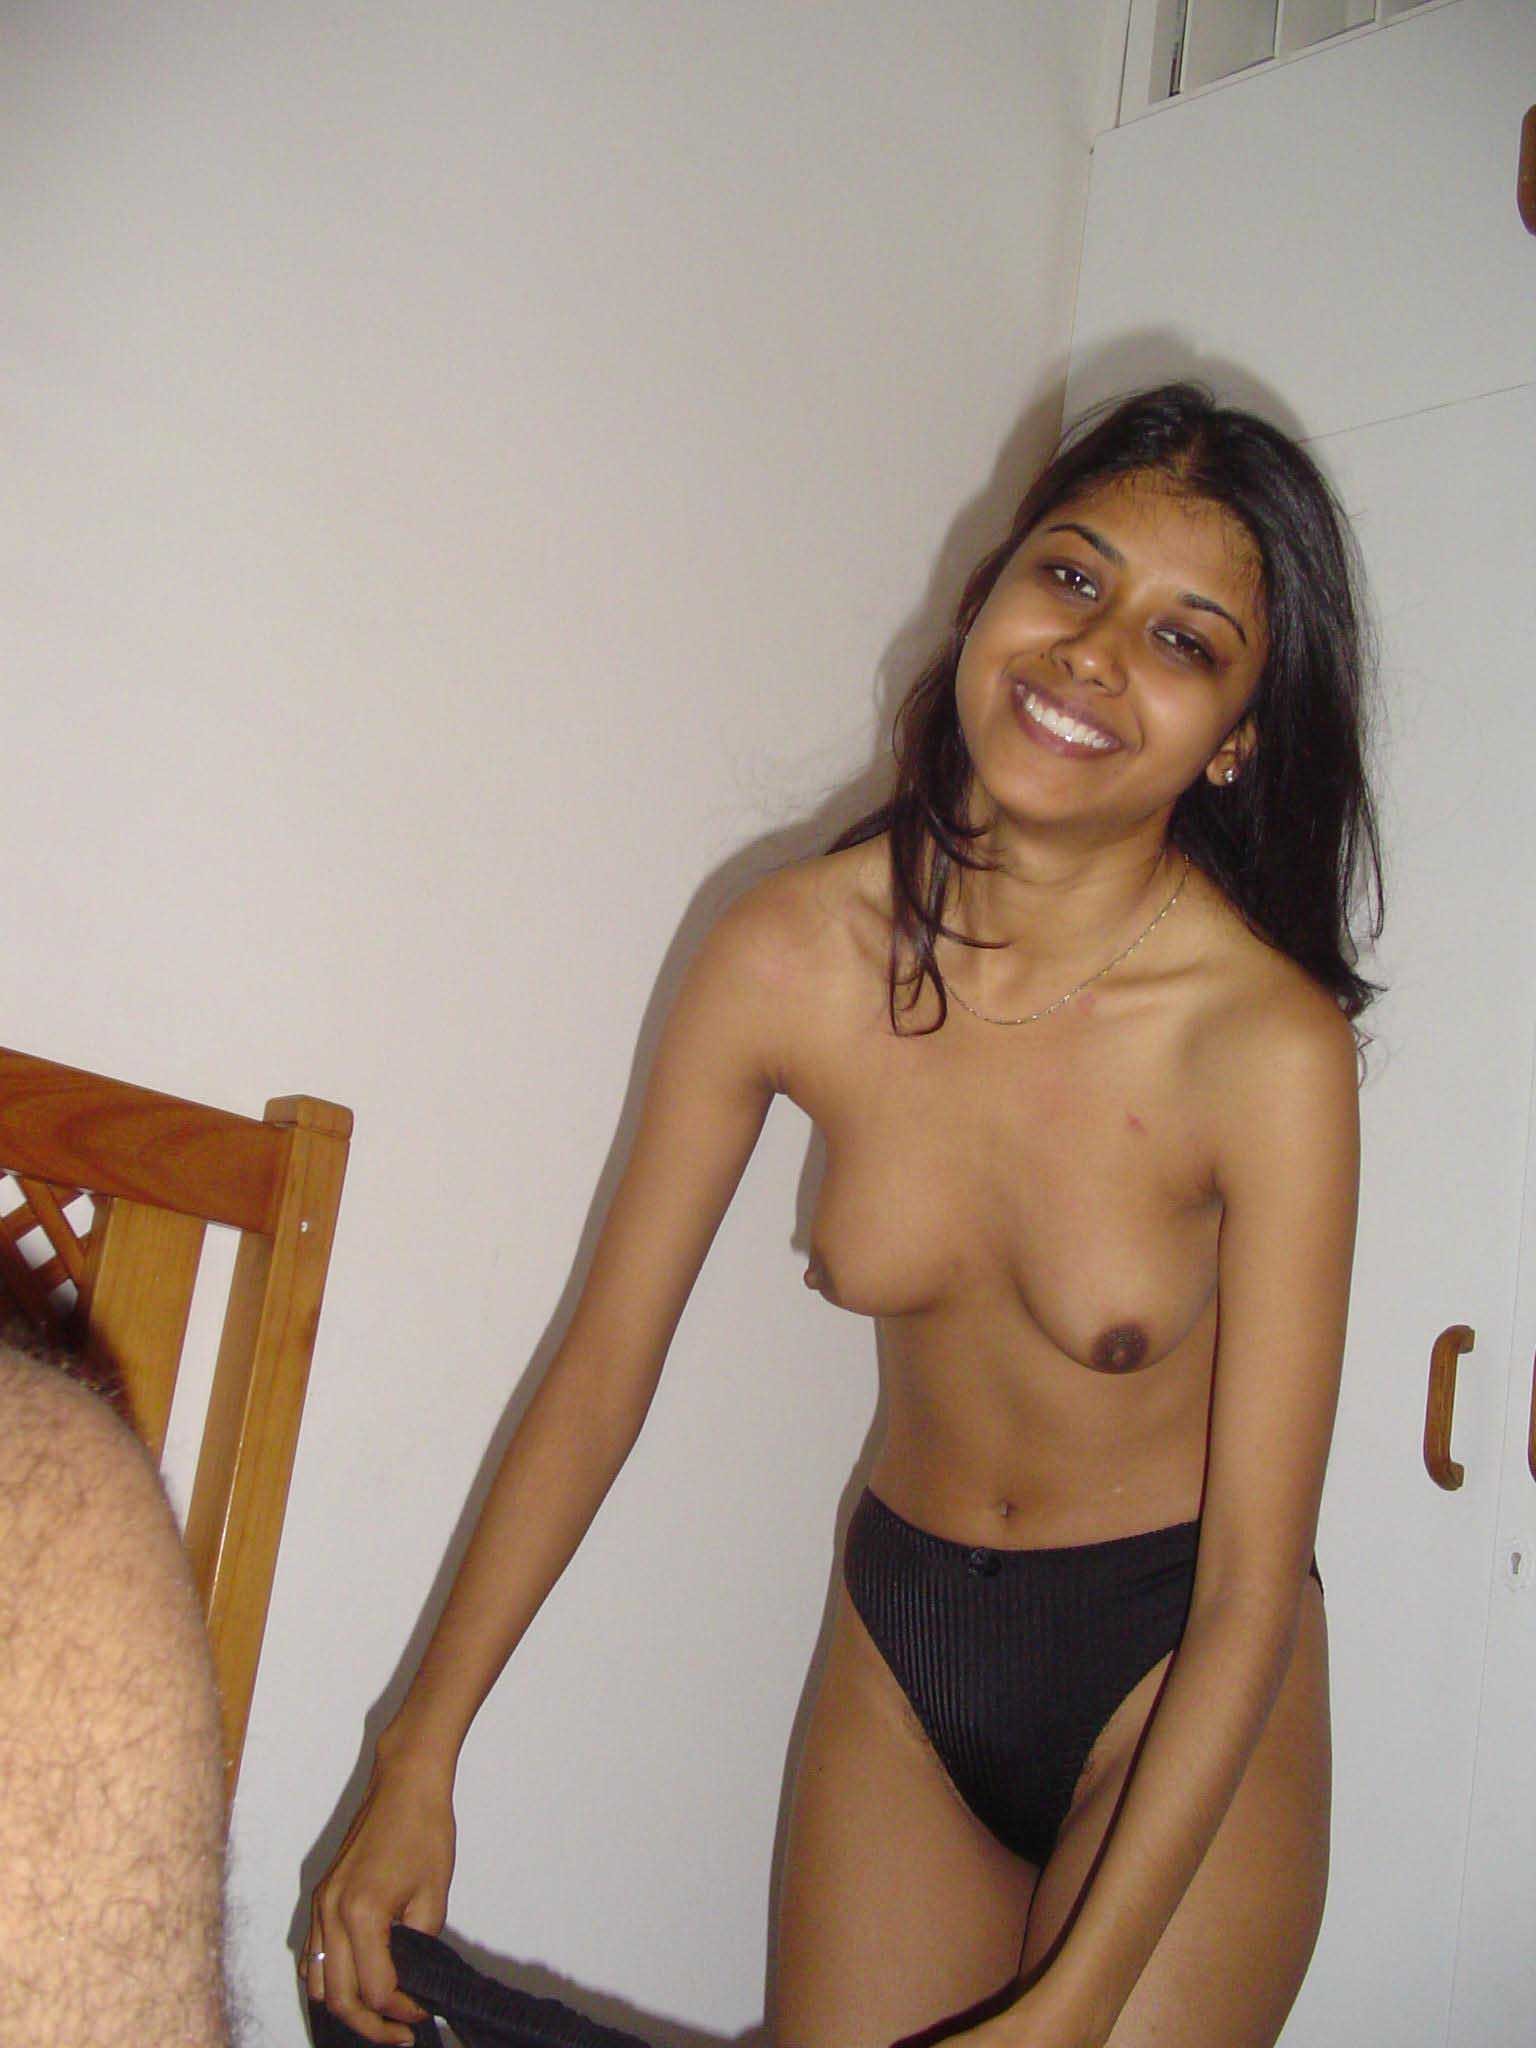 India Fat Girl Nude - Indian fat girl - SexyGirlCity: free porno pics